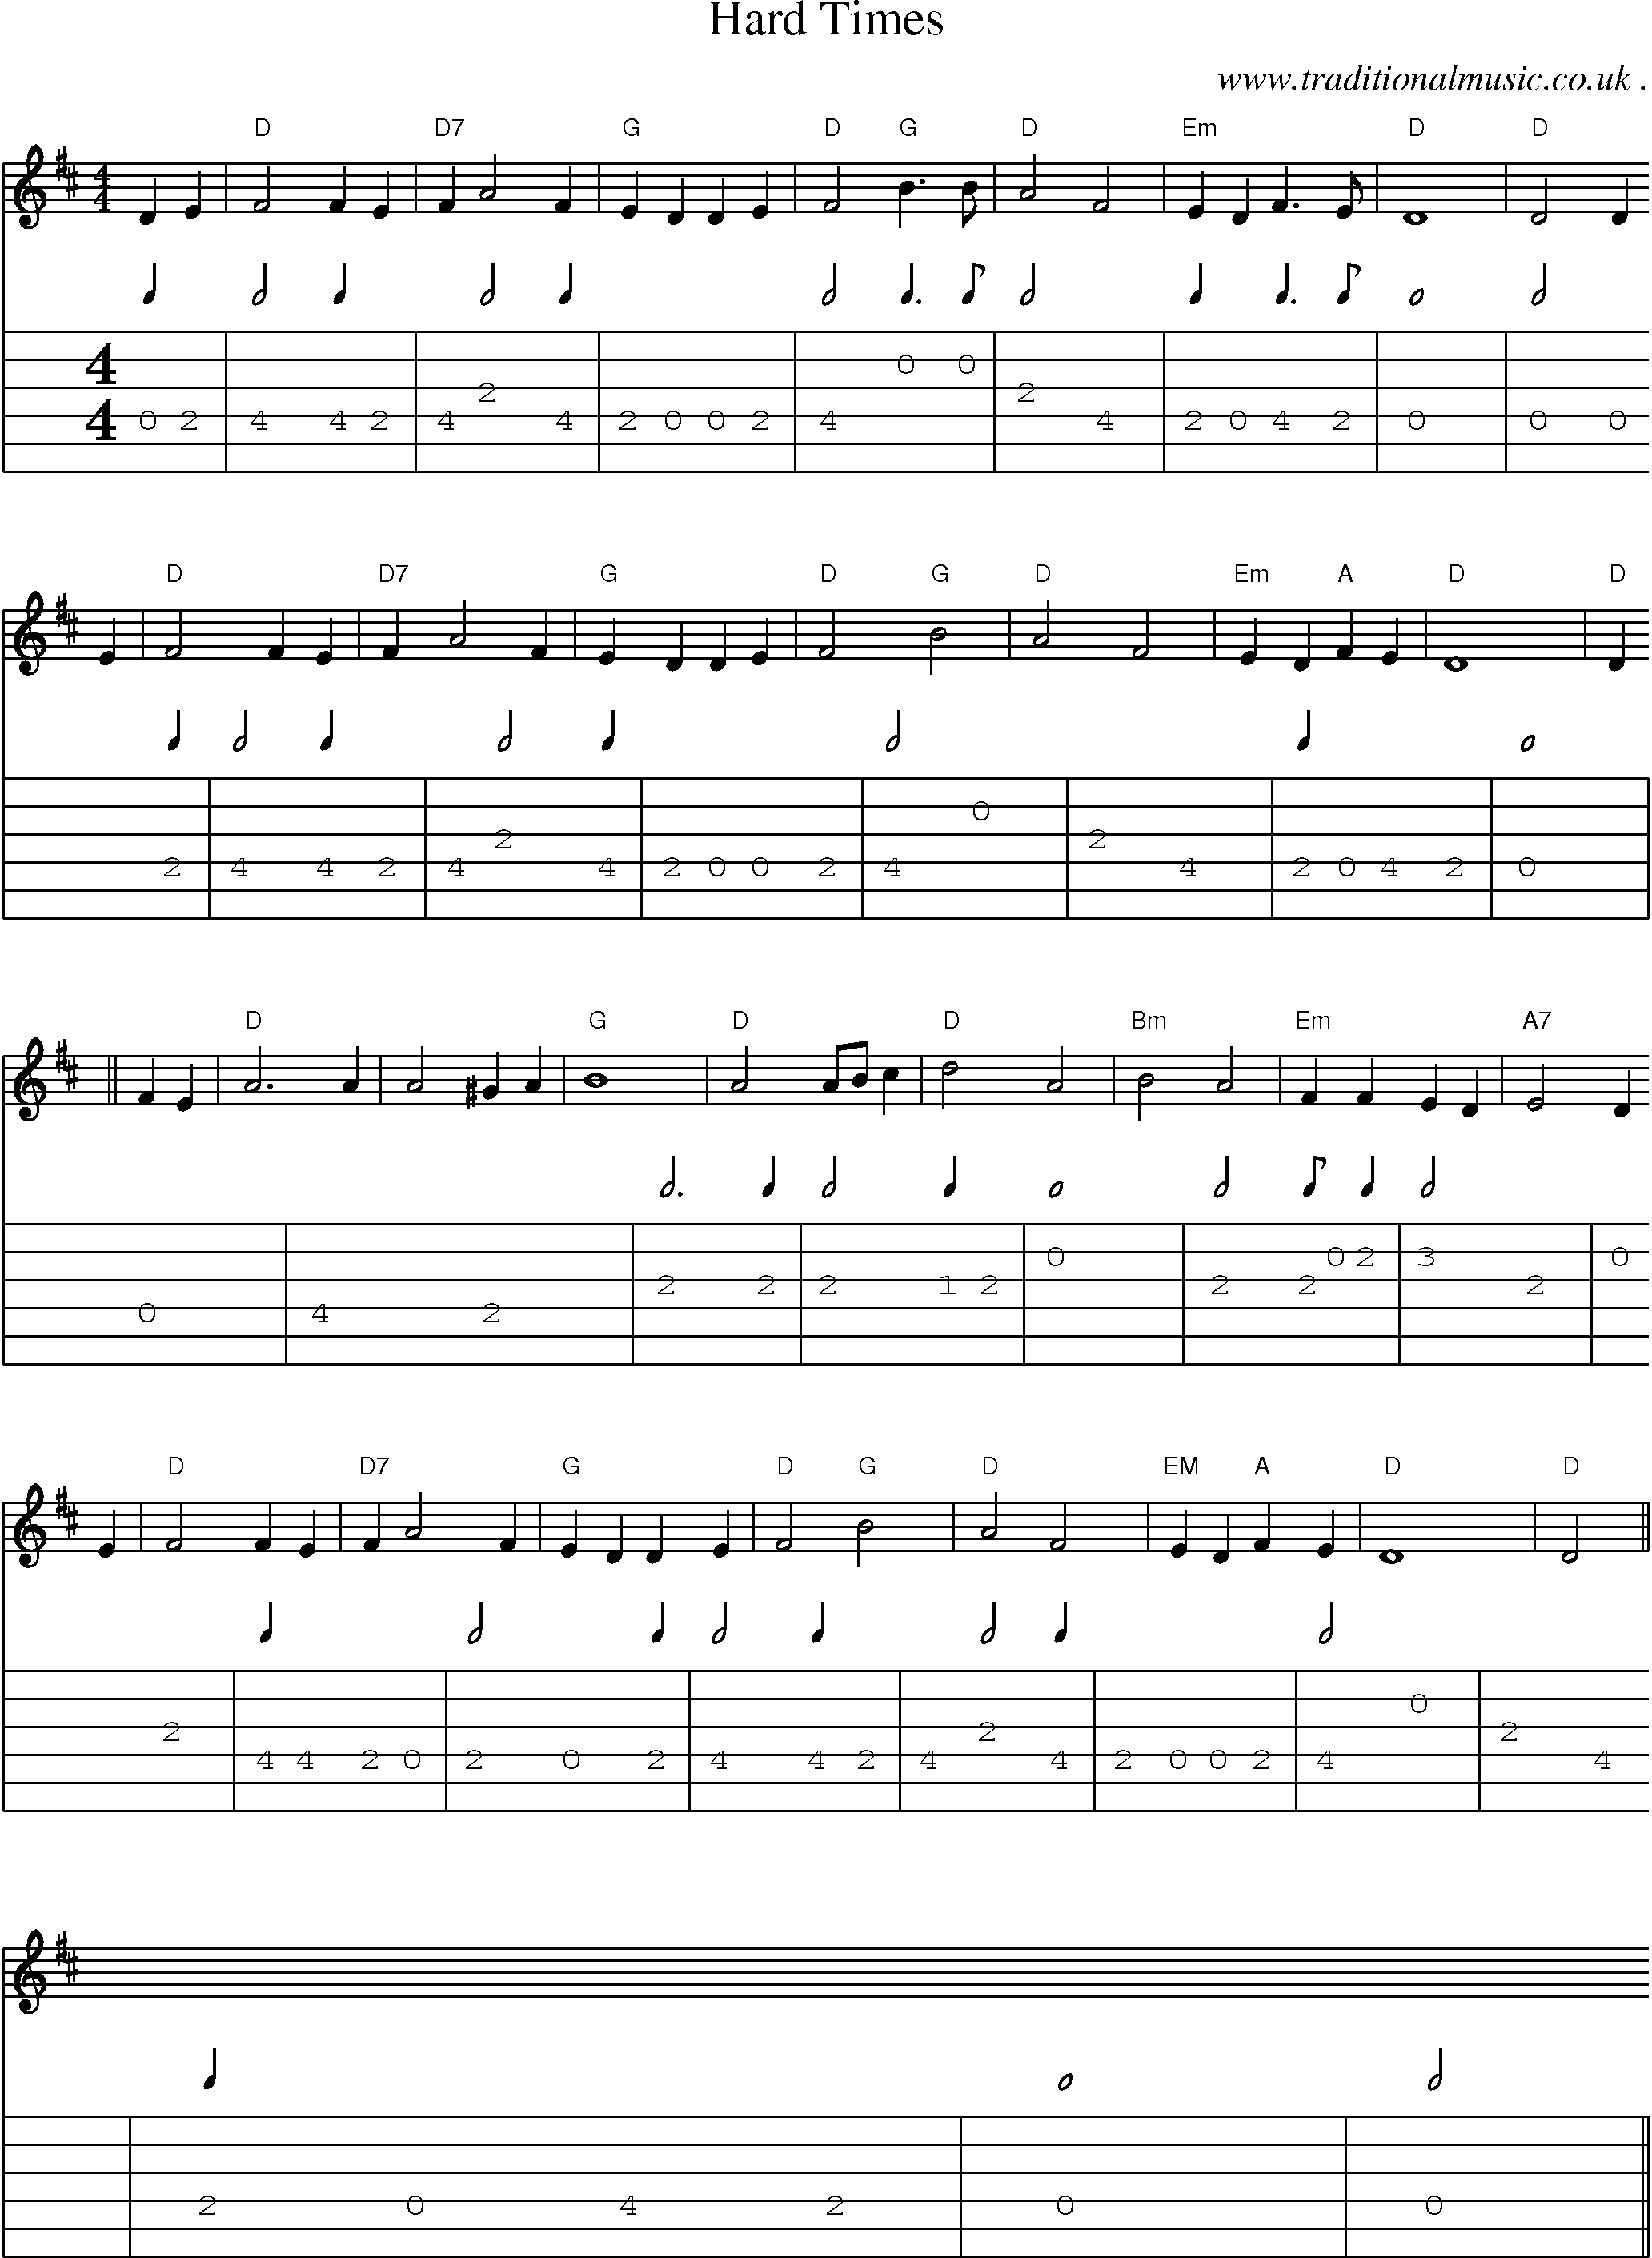 Music Score and Guitar Tabs for Hard Times